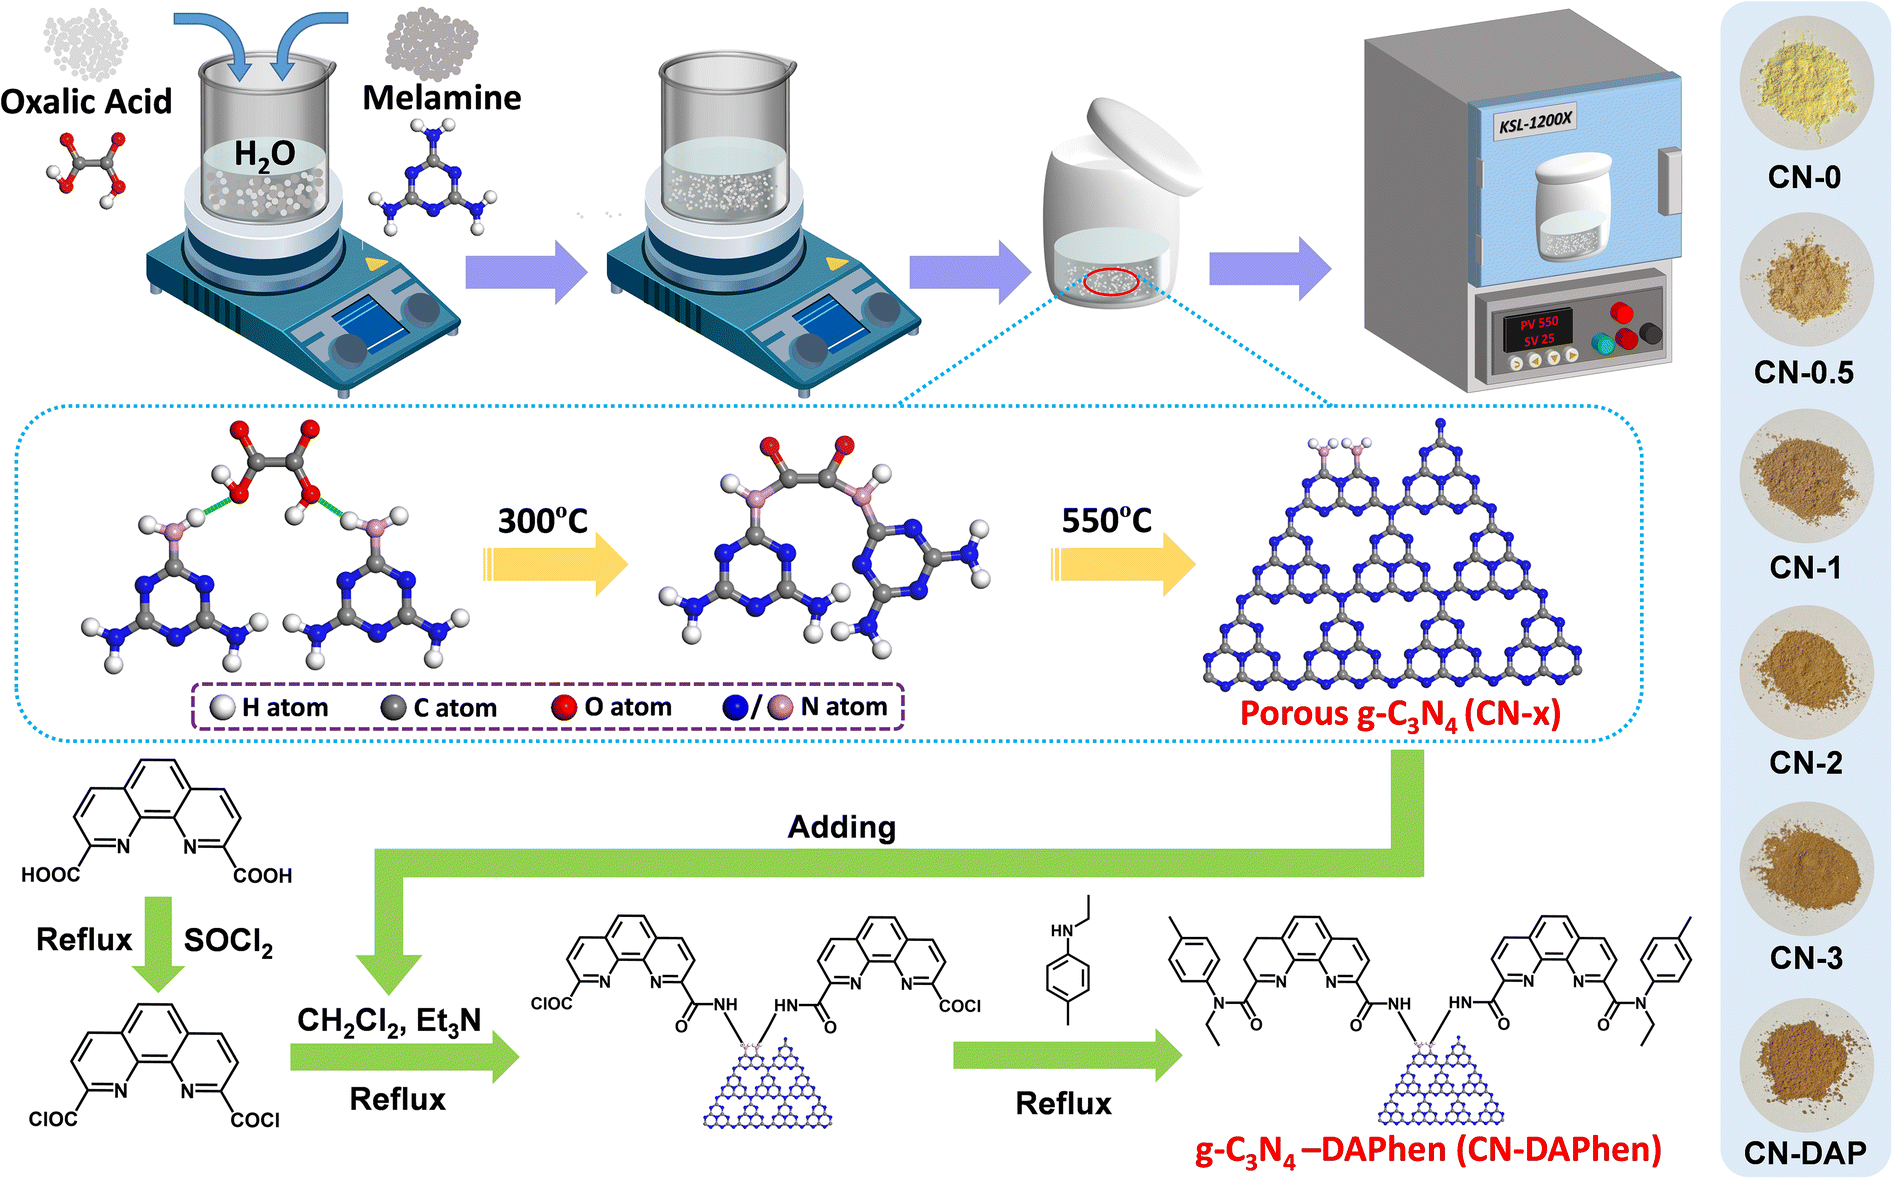 Porous g-C 3 N 4 modified with phenanthroline diamide for efficient and  ultrafast adsorption of palladium from simulated high level liquid waste -  Environmental Science: Nano (RSC Publishing) DOI:10.1039/D2EN00868H